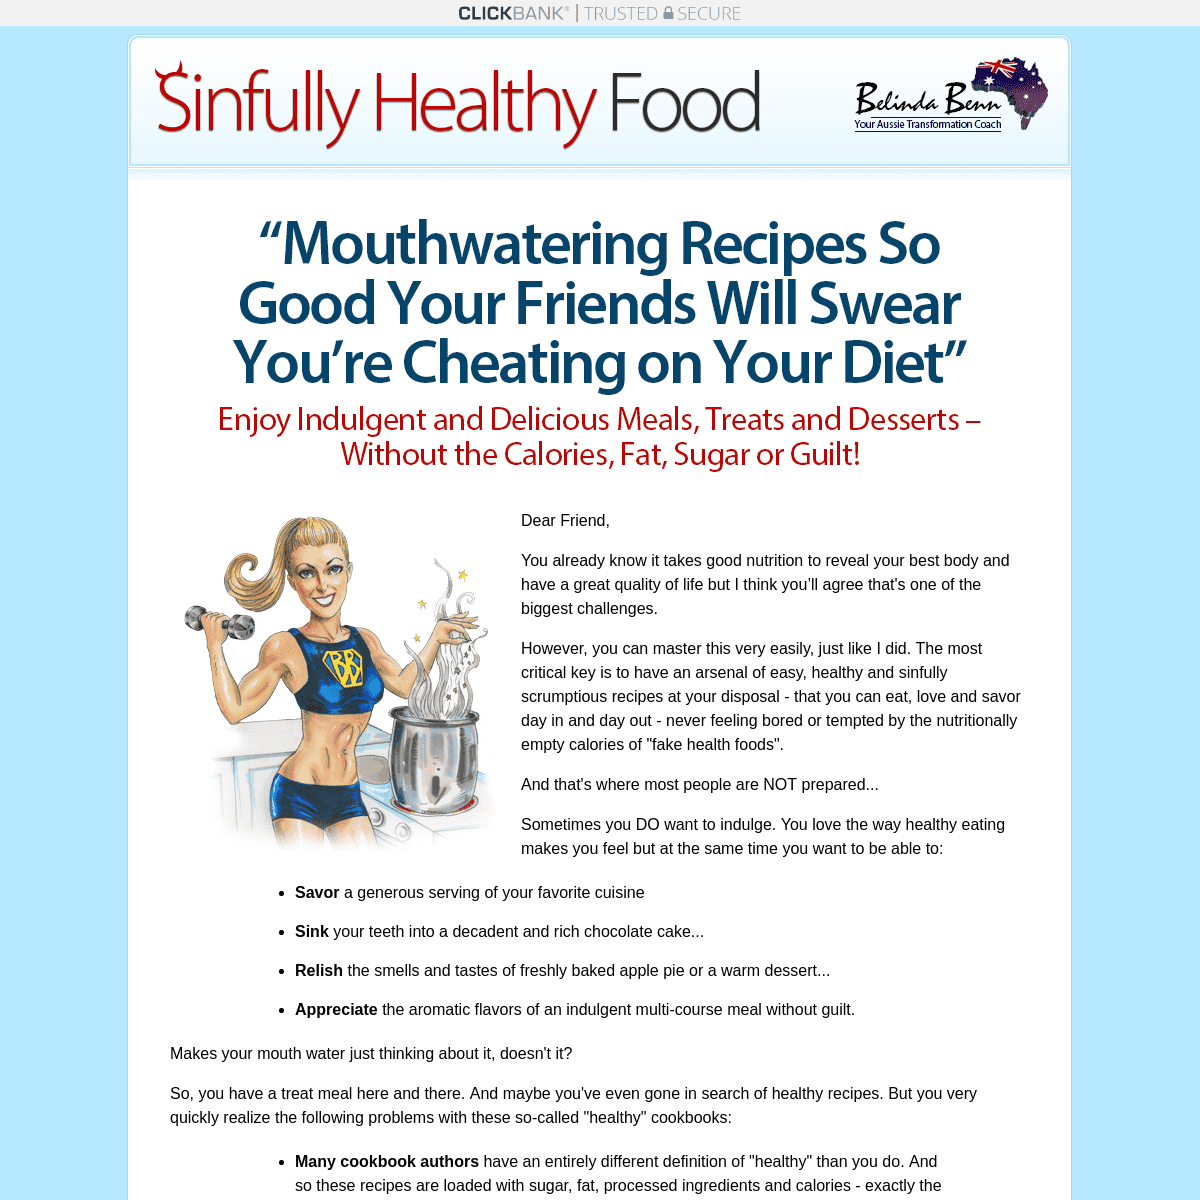 A complete backup of sinfullyhealthyfood.com